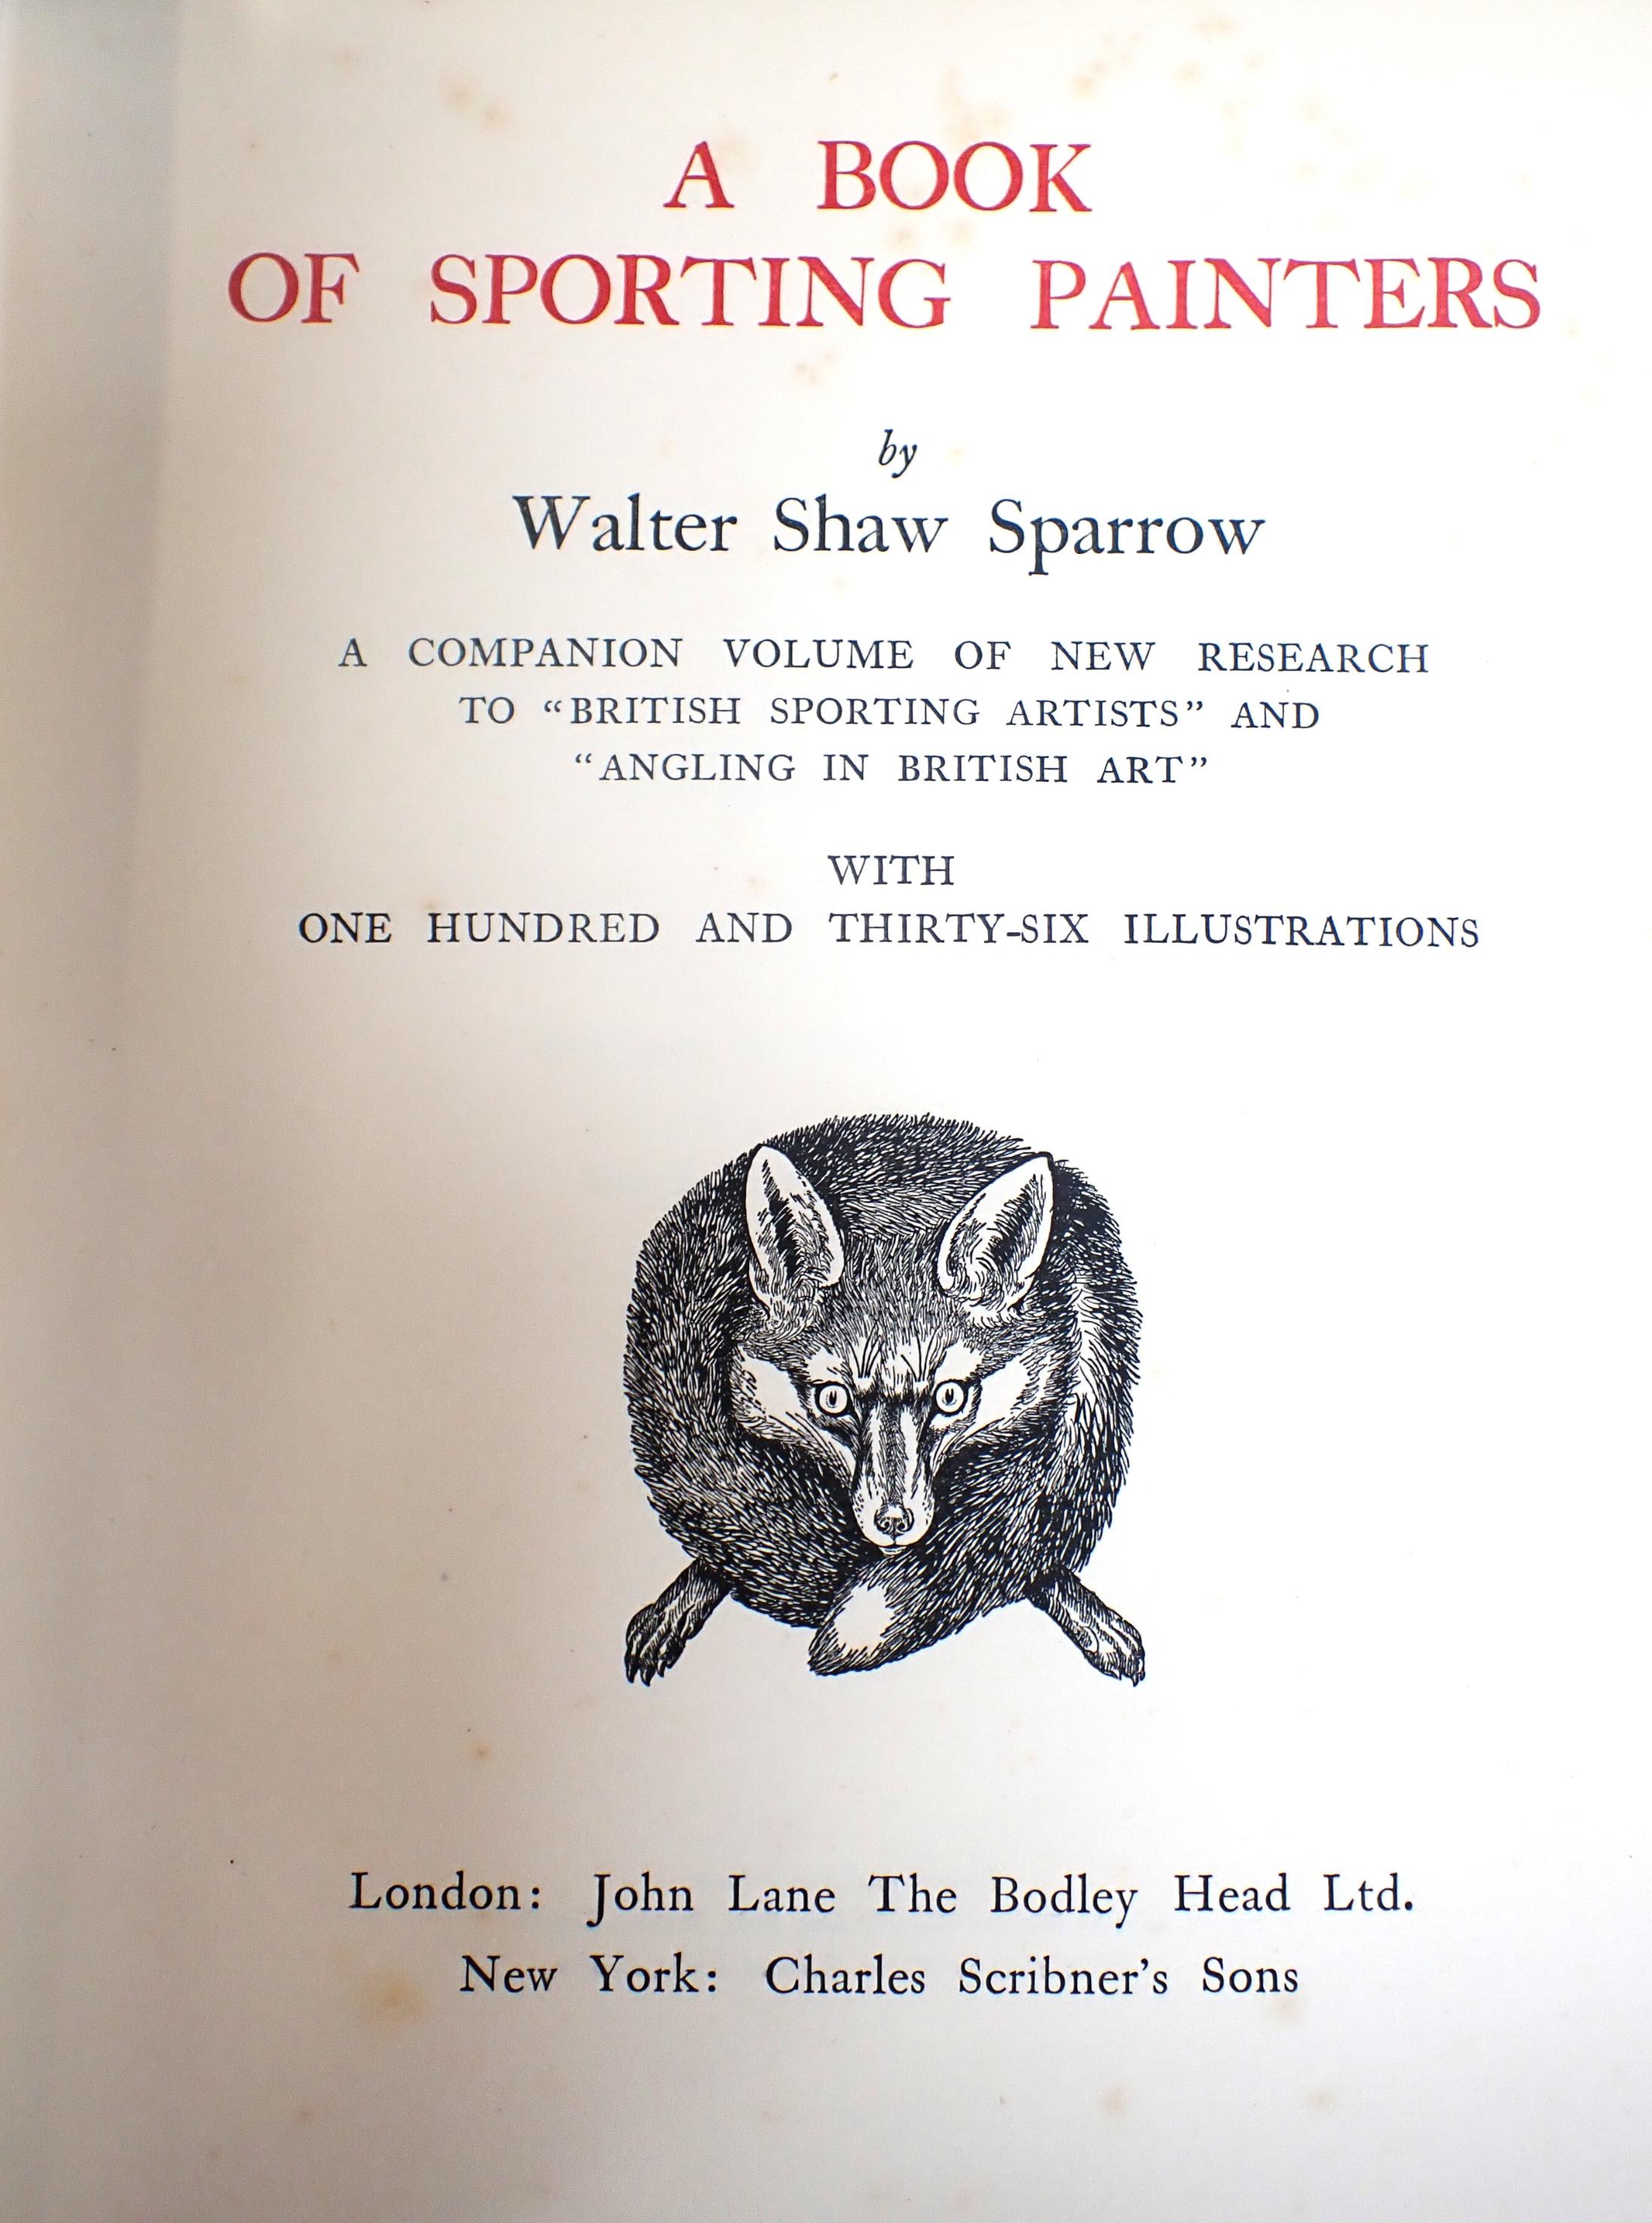 WALTER SHAW SPARROW: 'A BOOK OF SPORTING PAINTERS' - Image 2 of 3